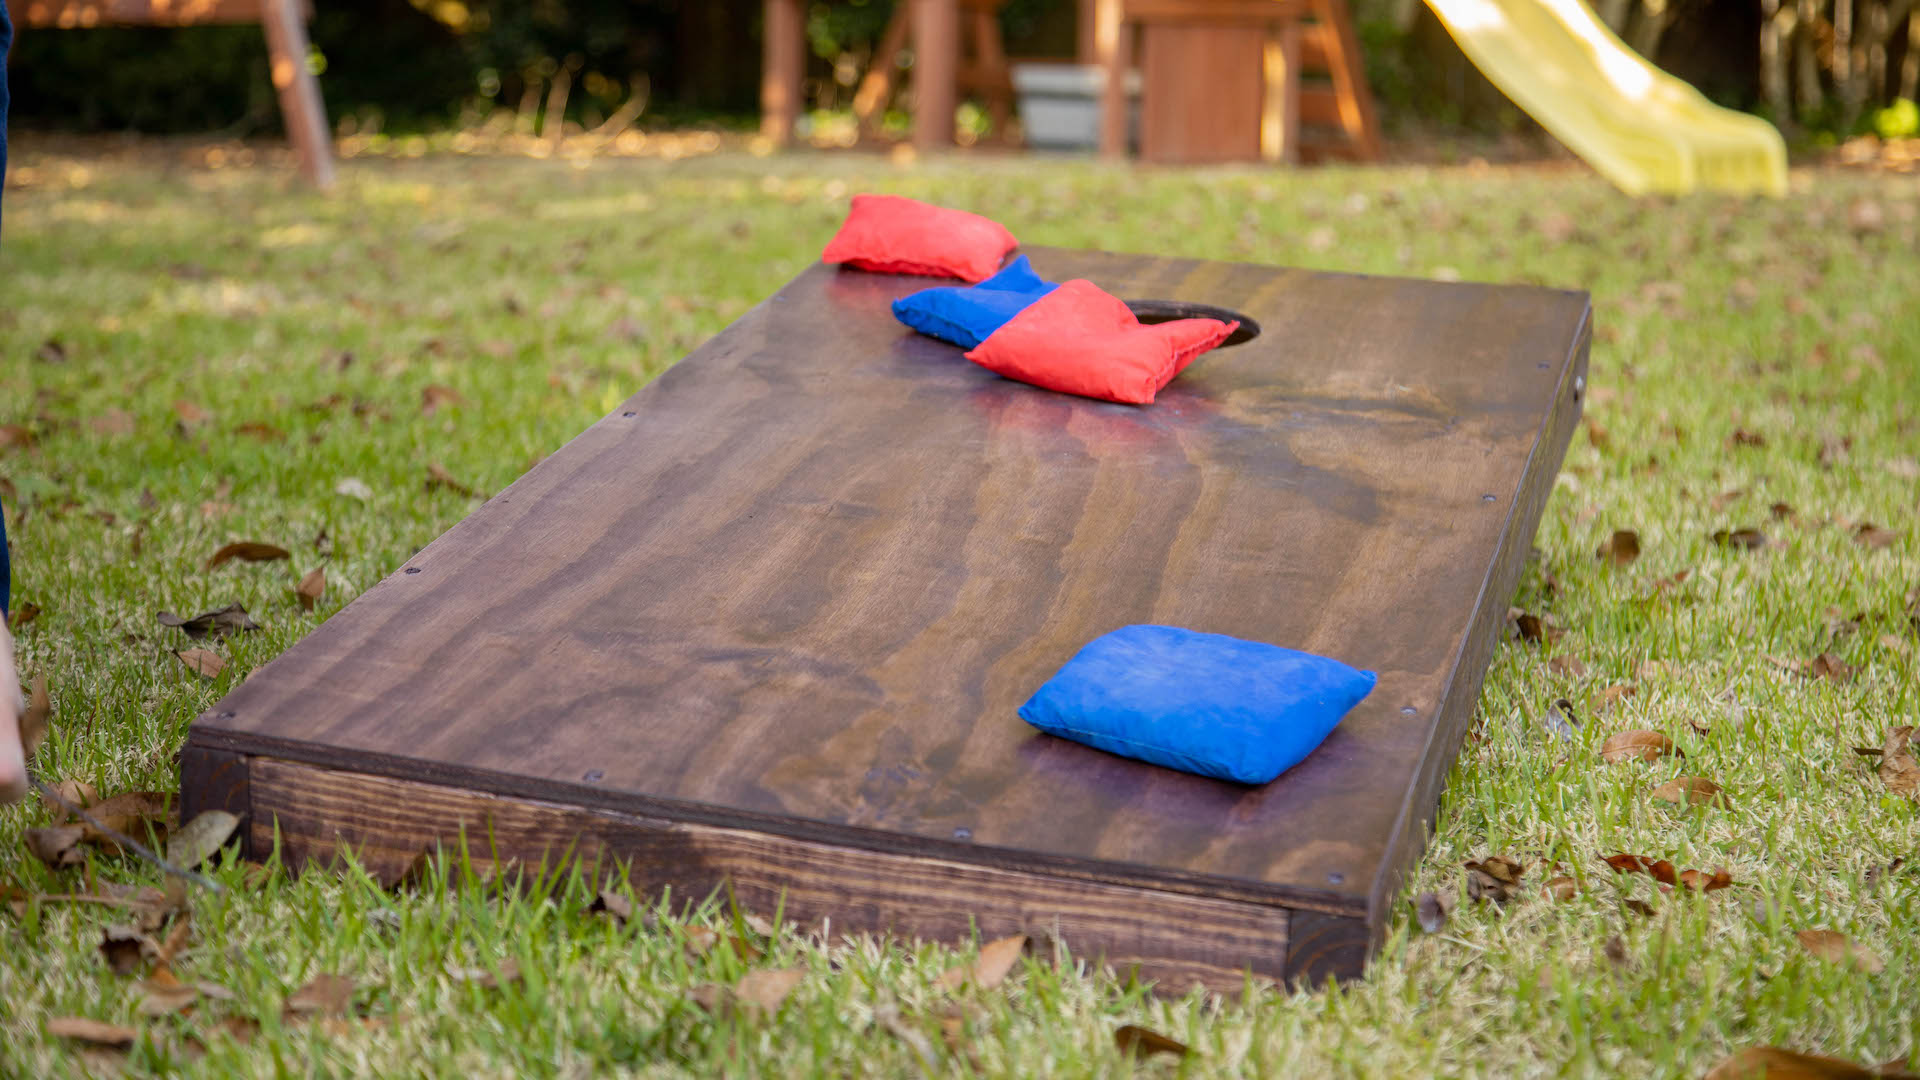 Cornhole Game: How to Build the Board